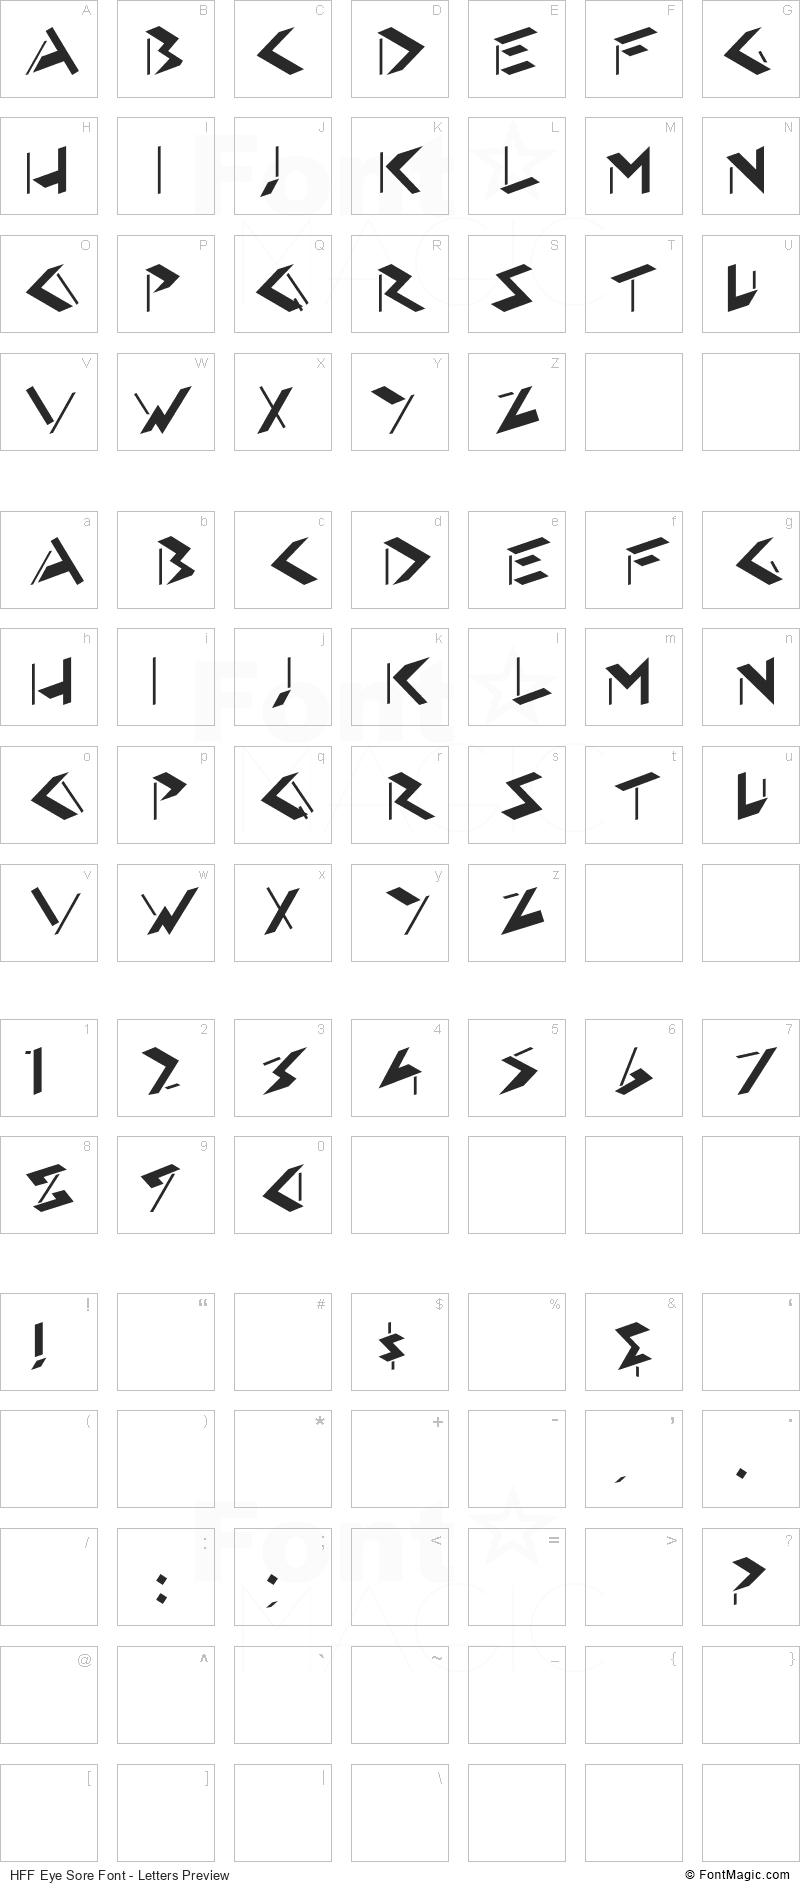 HFF Eye Sore Font - All Latters Preview Chart